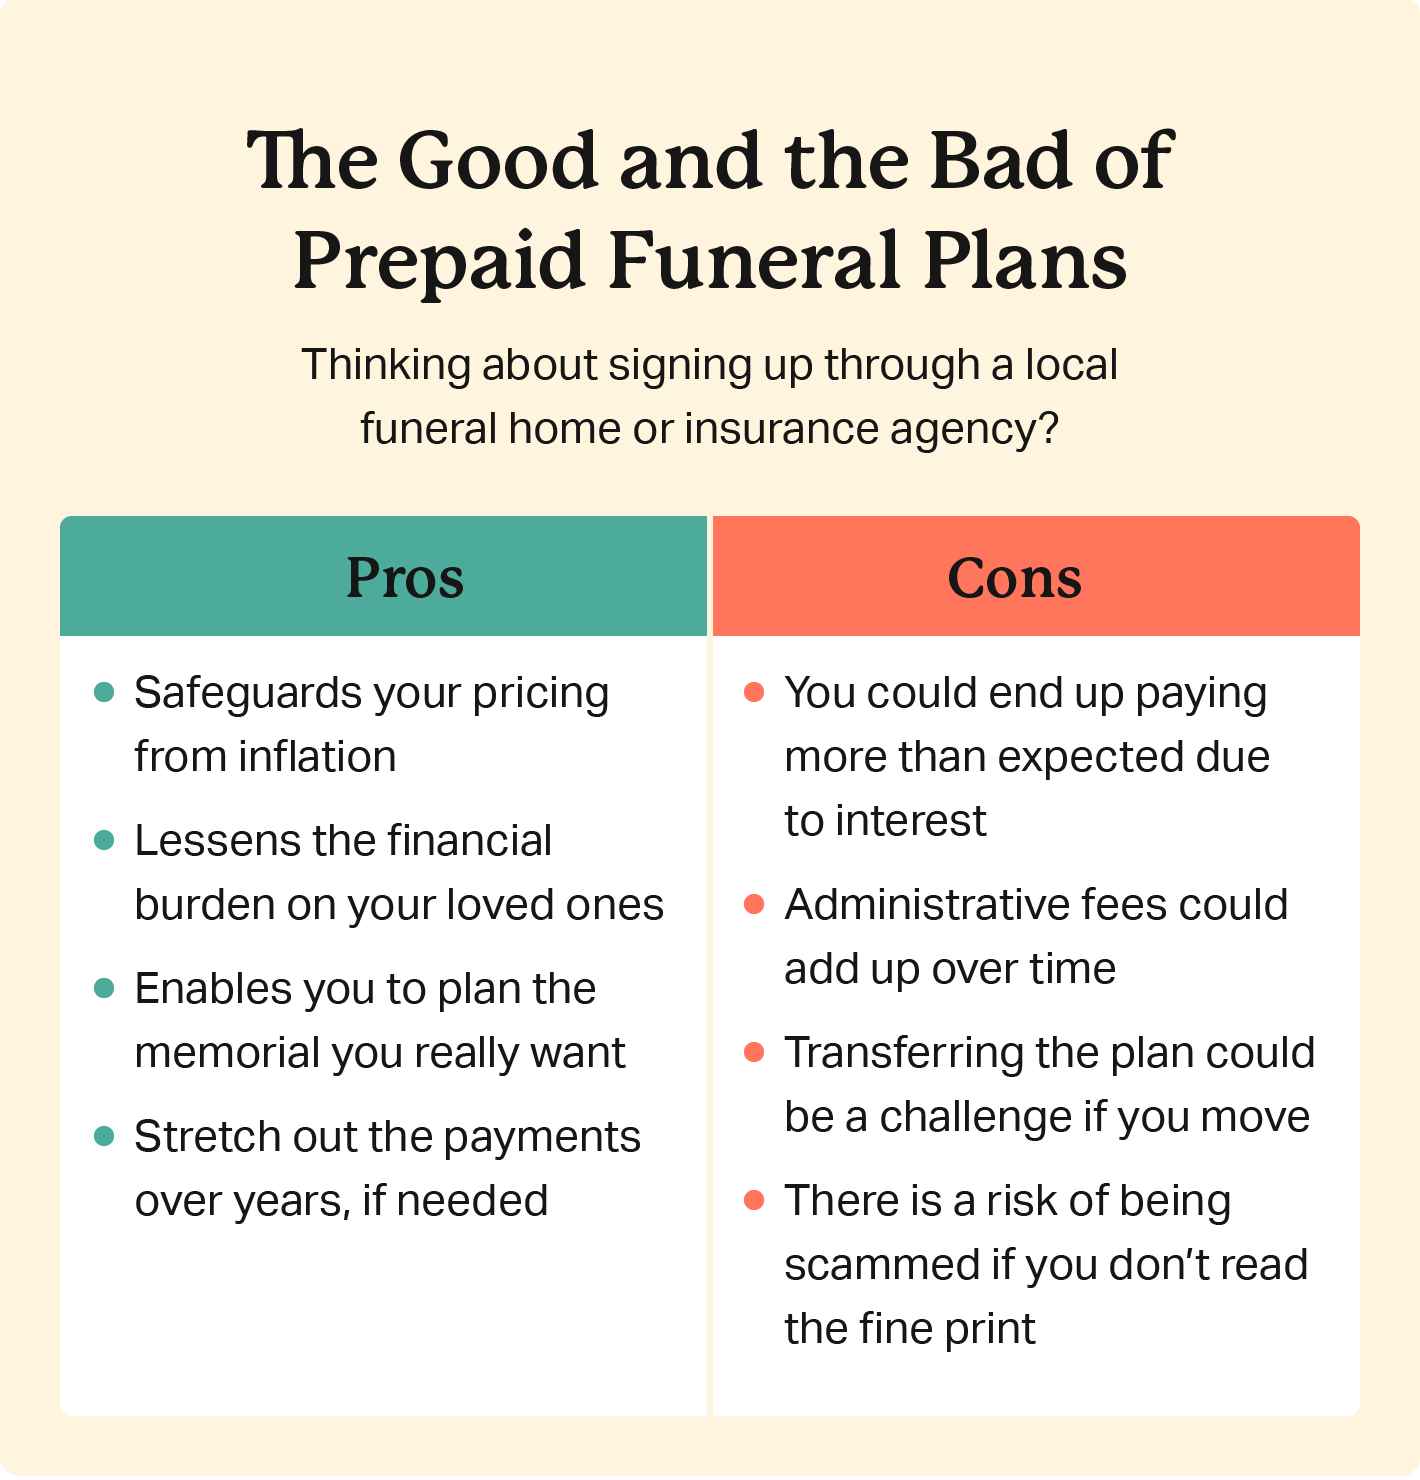 List of prepaid funeral plans pros and cons